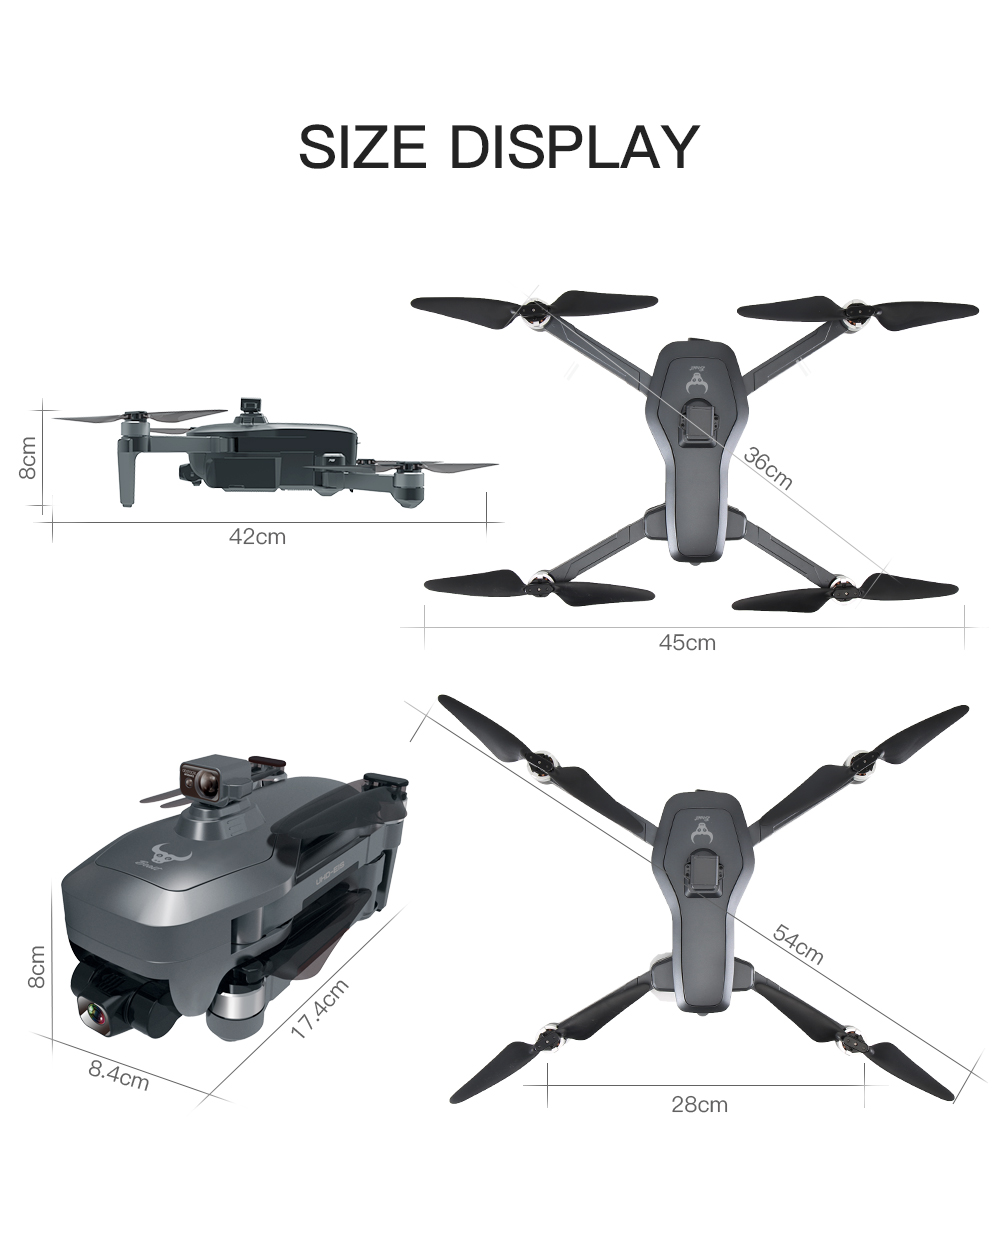 ZLL SG906 MAX GPS 5G WIFI FPV With 4K HD Camera 3-Axis EIS Anti-shake Gimbal Obstacle Avoidance Brushless Foldable RC Drone Quadcopter RTF 160